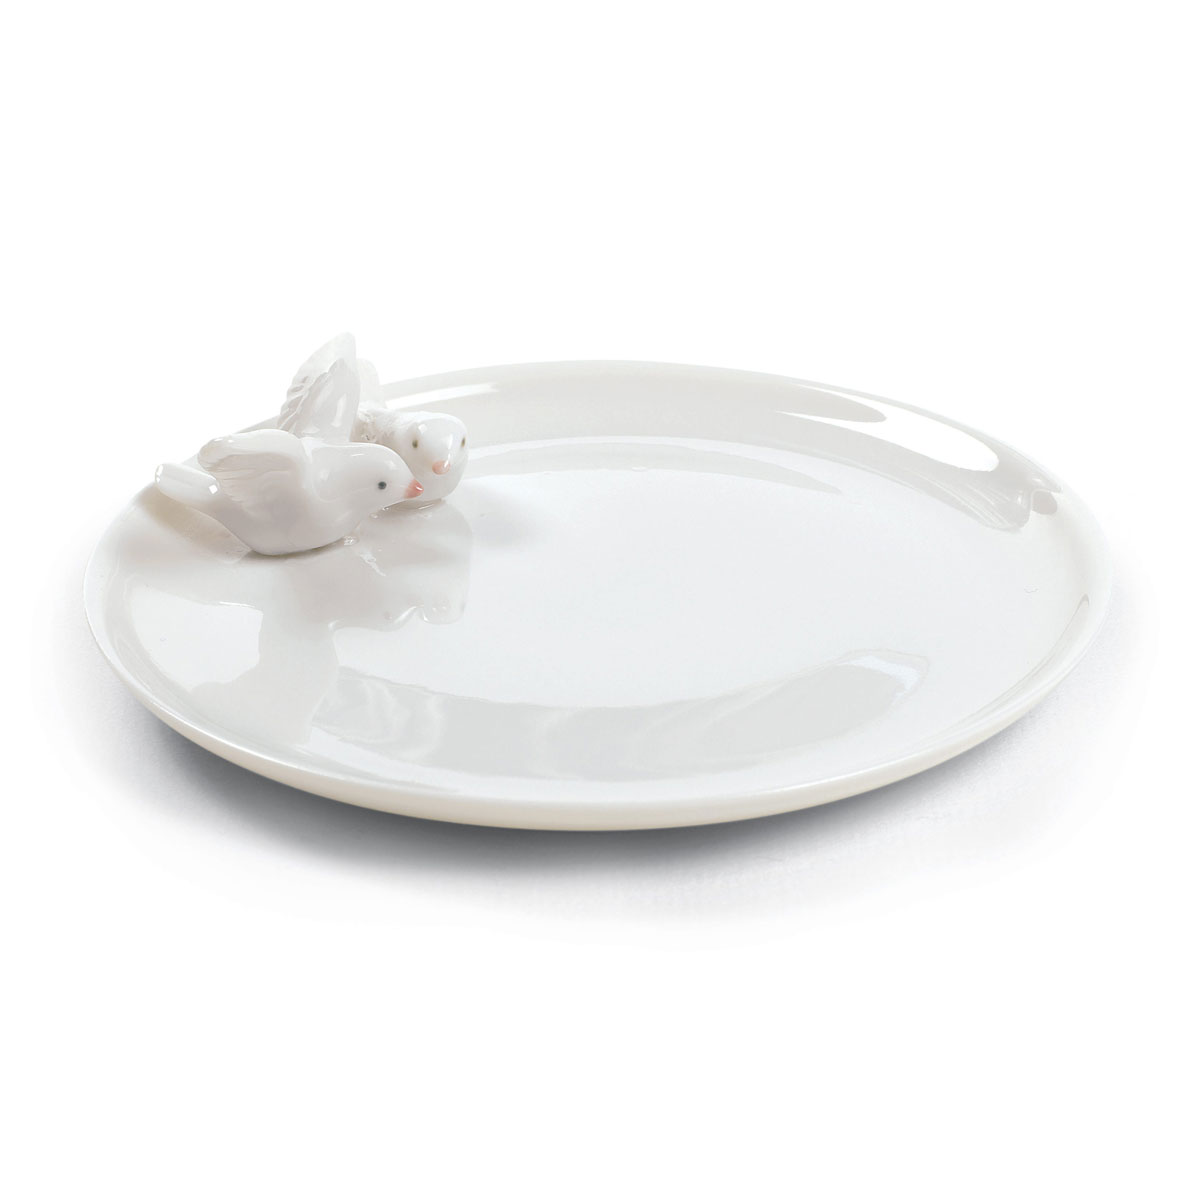 Lladro Art Of The Table, Doves Plate